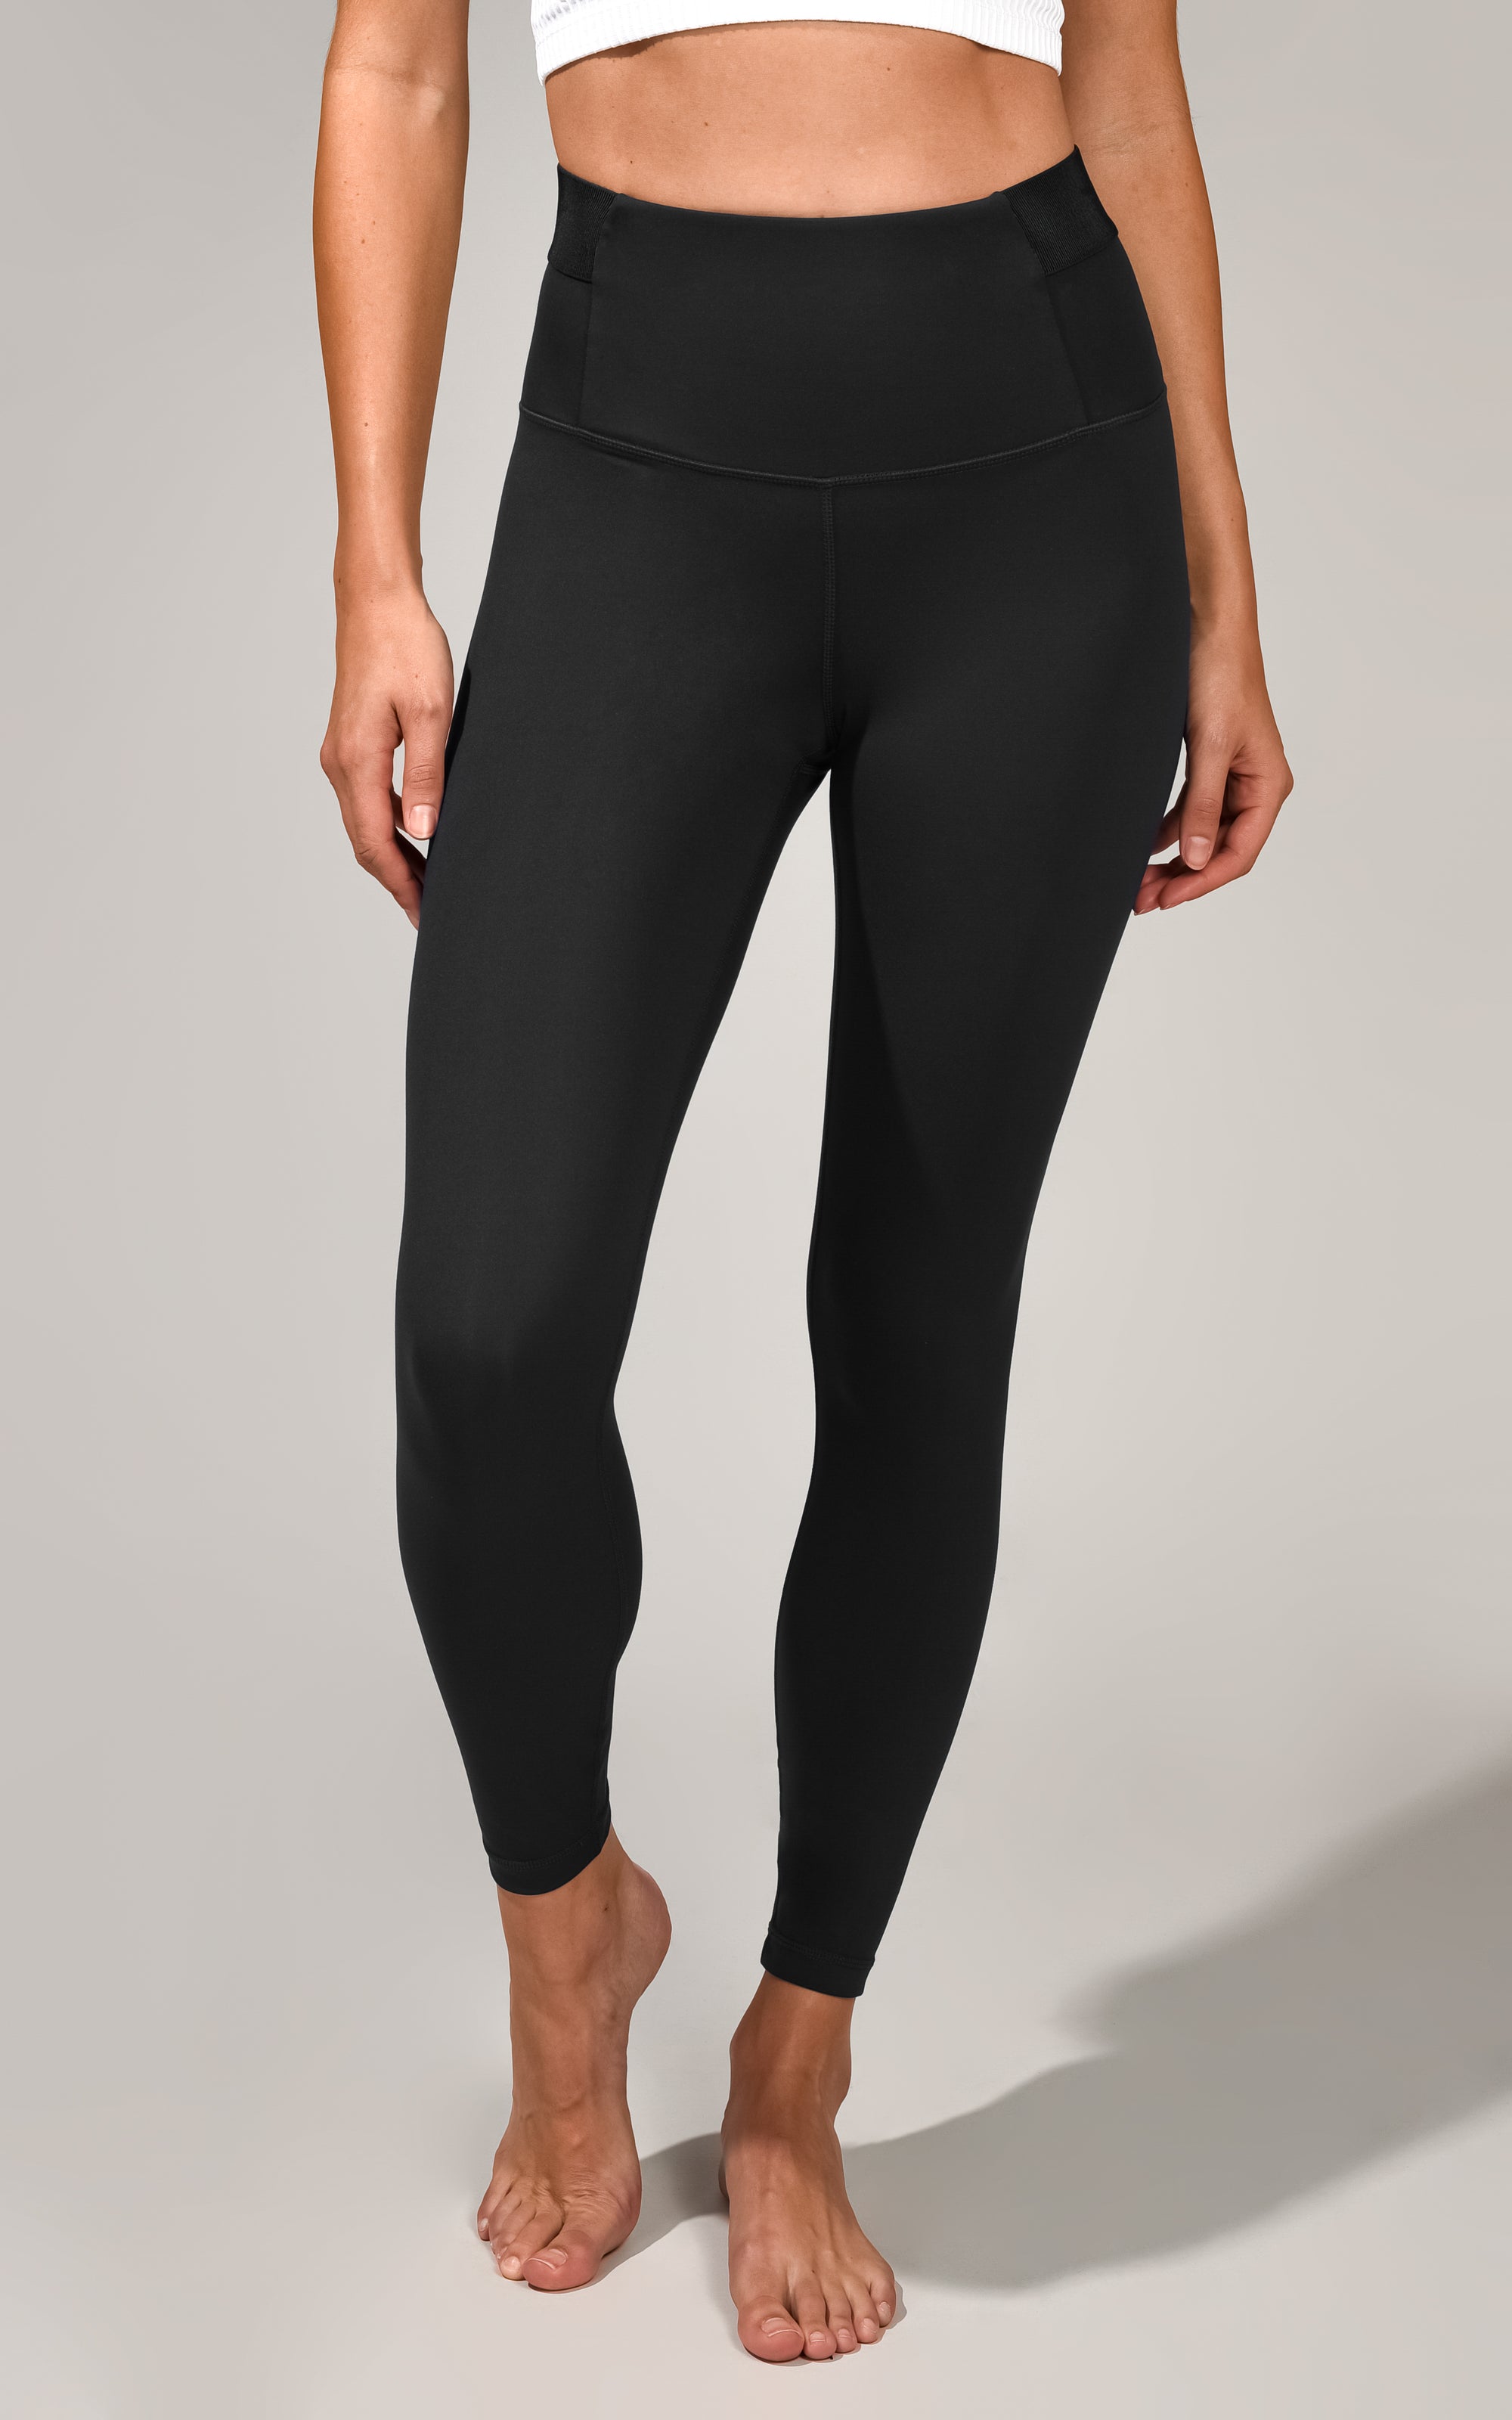 Yogalicious Womens Lux Ballerina Ruched Ankle Legging - Black - Large :  Target